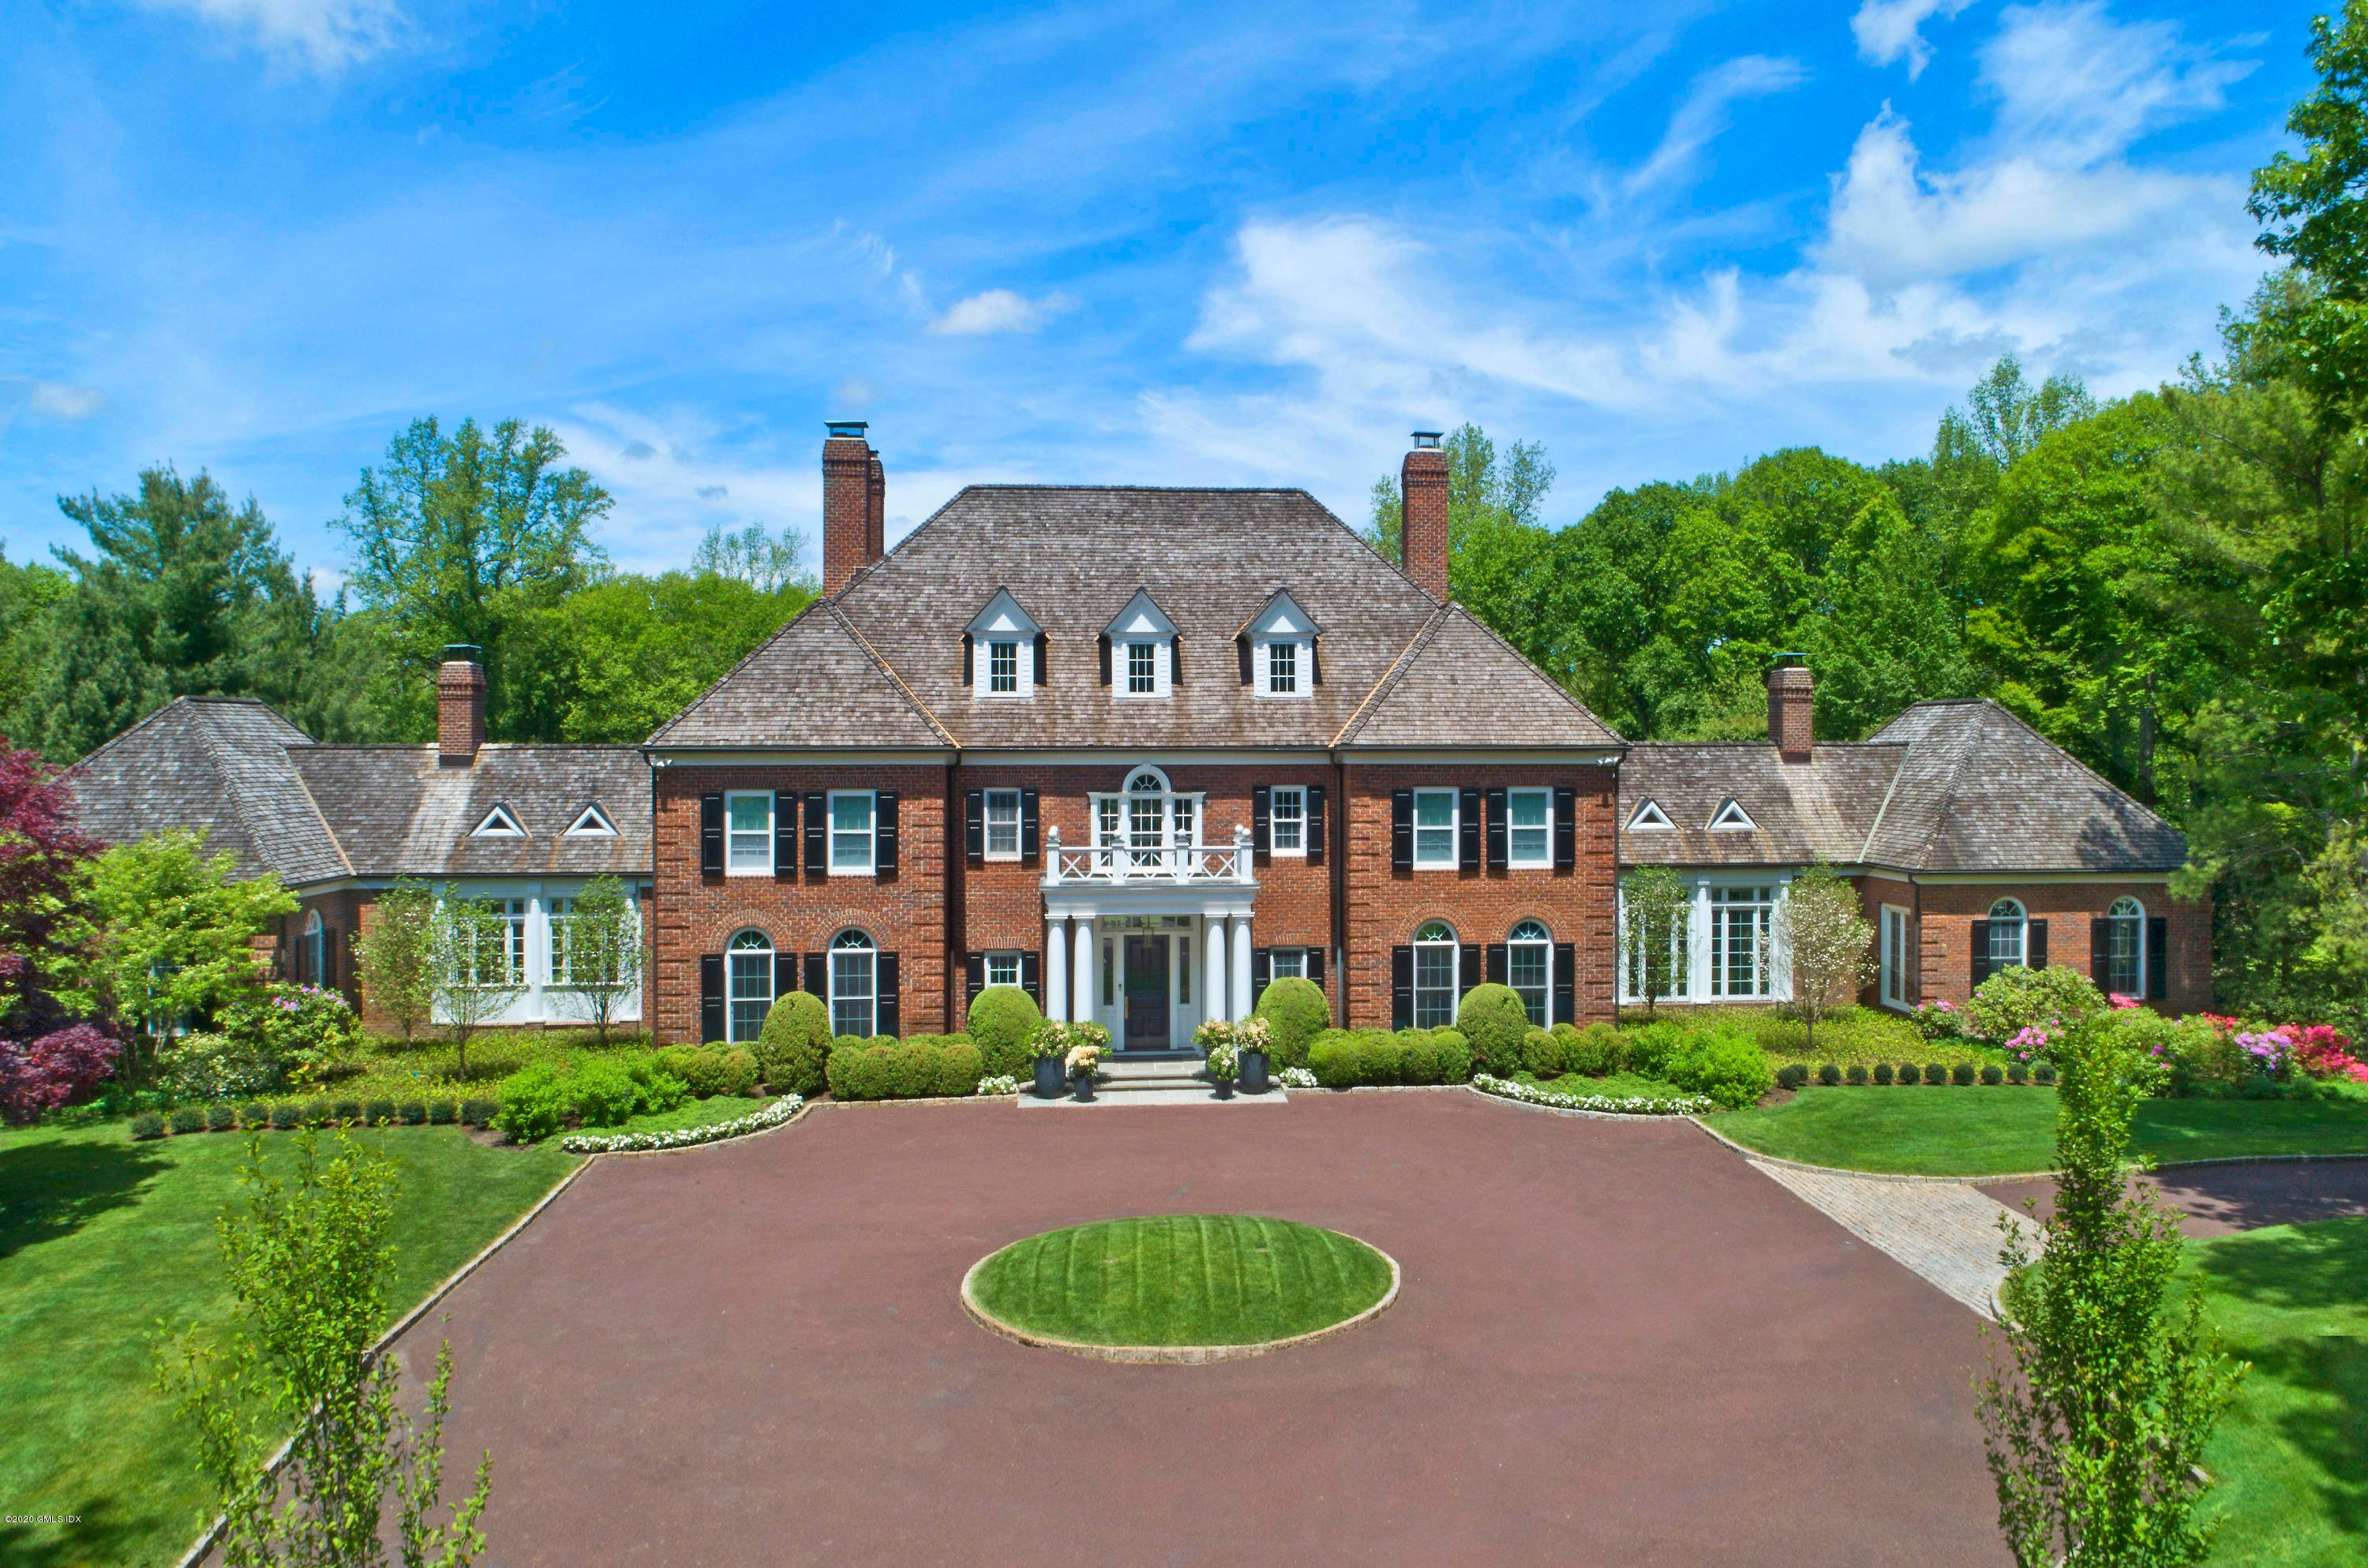 Welcome to Conyers Farm in Greenwich, CT, ranked by Forbes as one of America's most exclusive, private gated communities featuring 24 hr security and home to the world renowned Greenwich ...